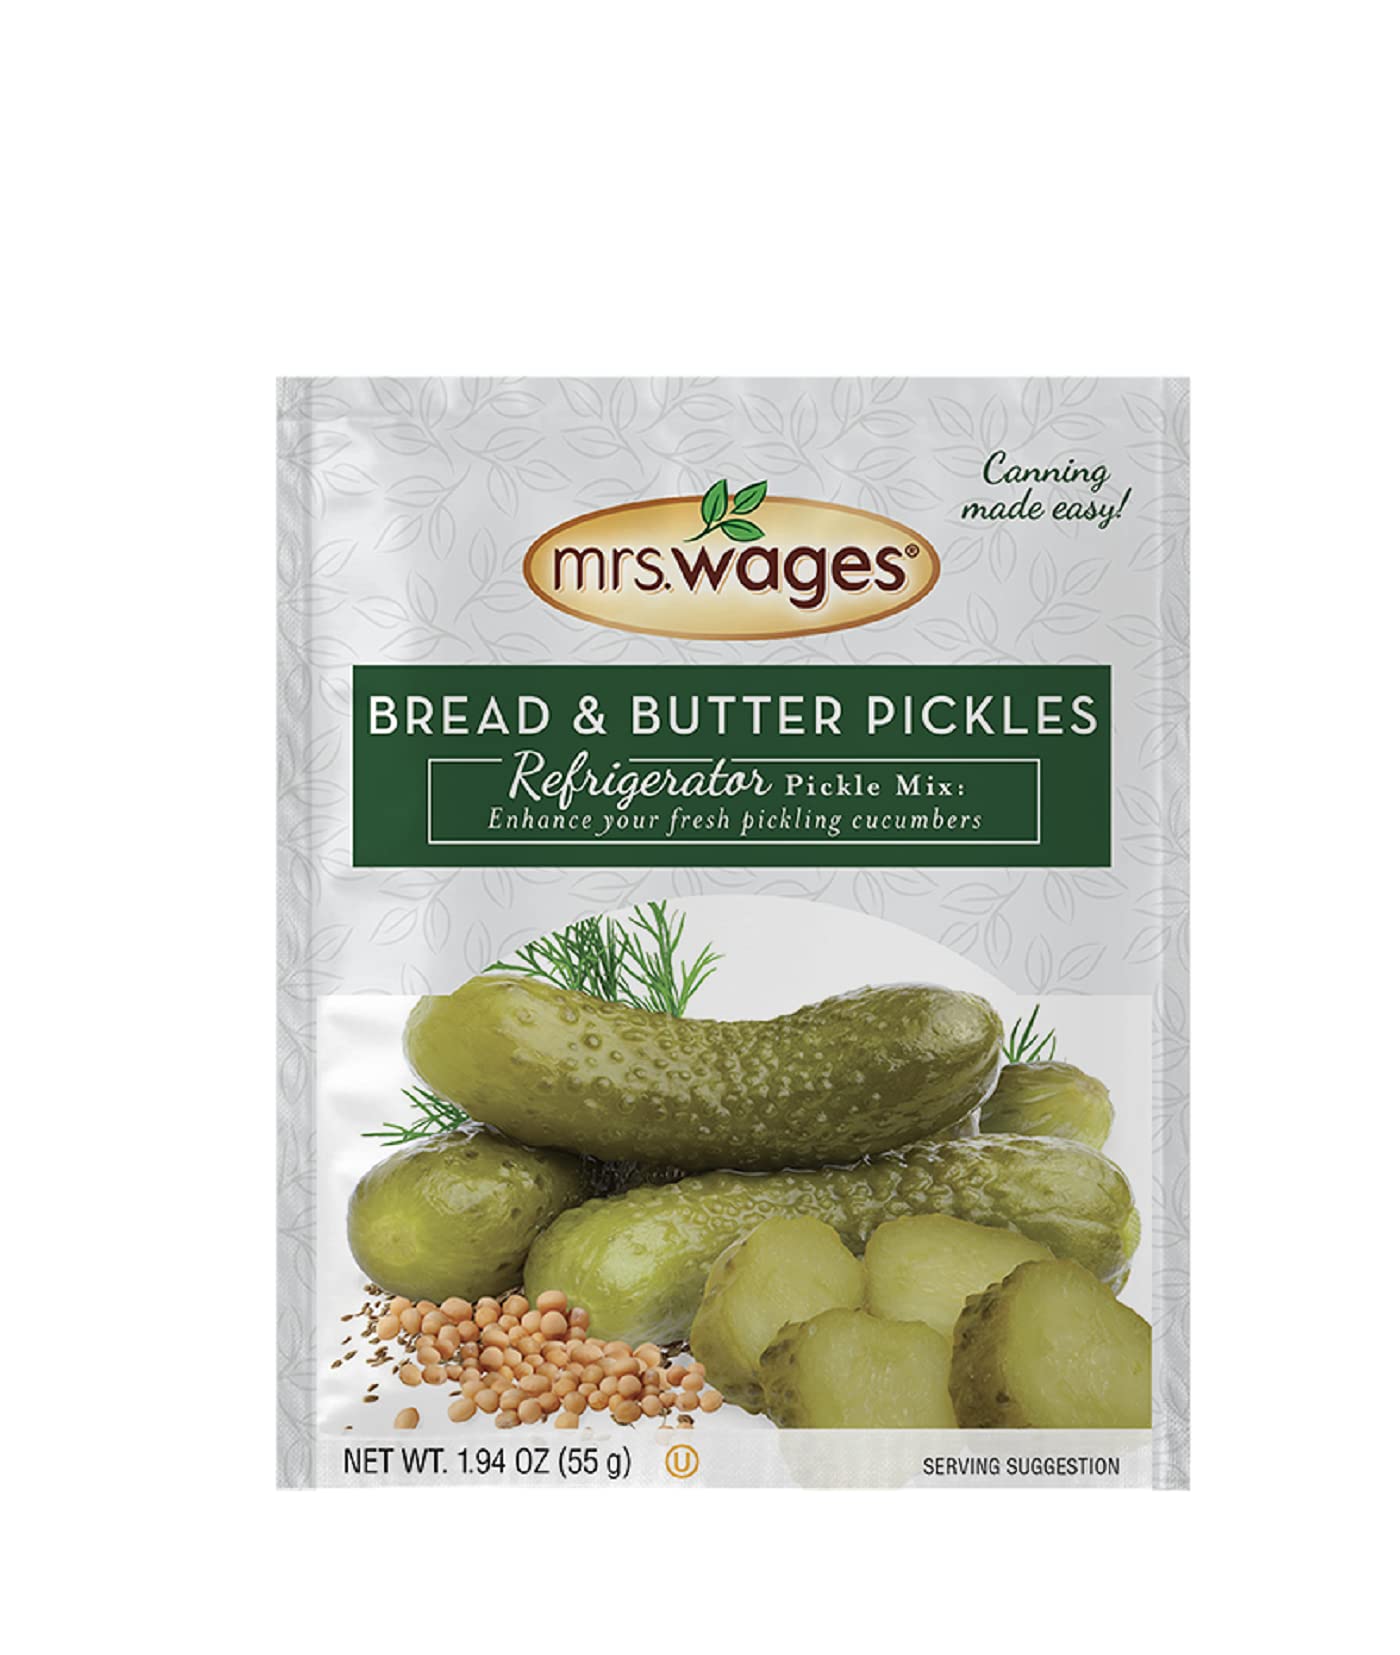 Mrs. Wages Bread and Butter Pickles Refrigerator Mix, 1.94 Oz, 12 Pack